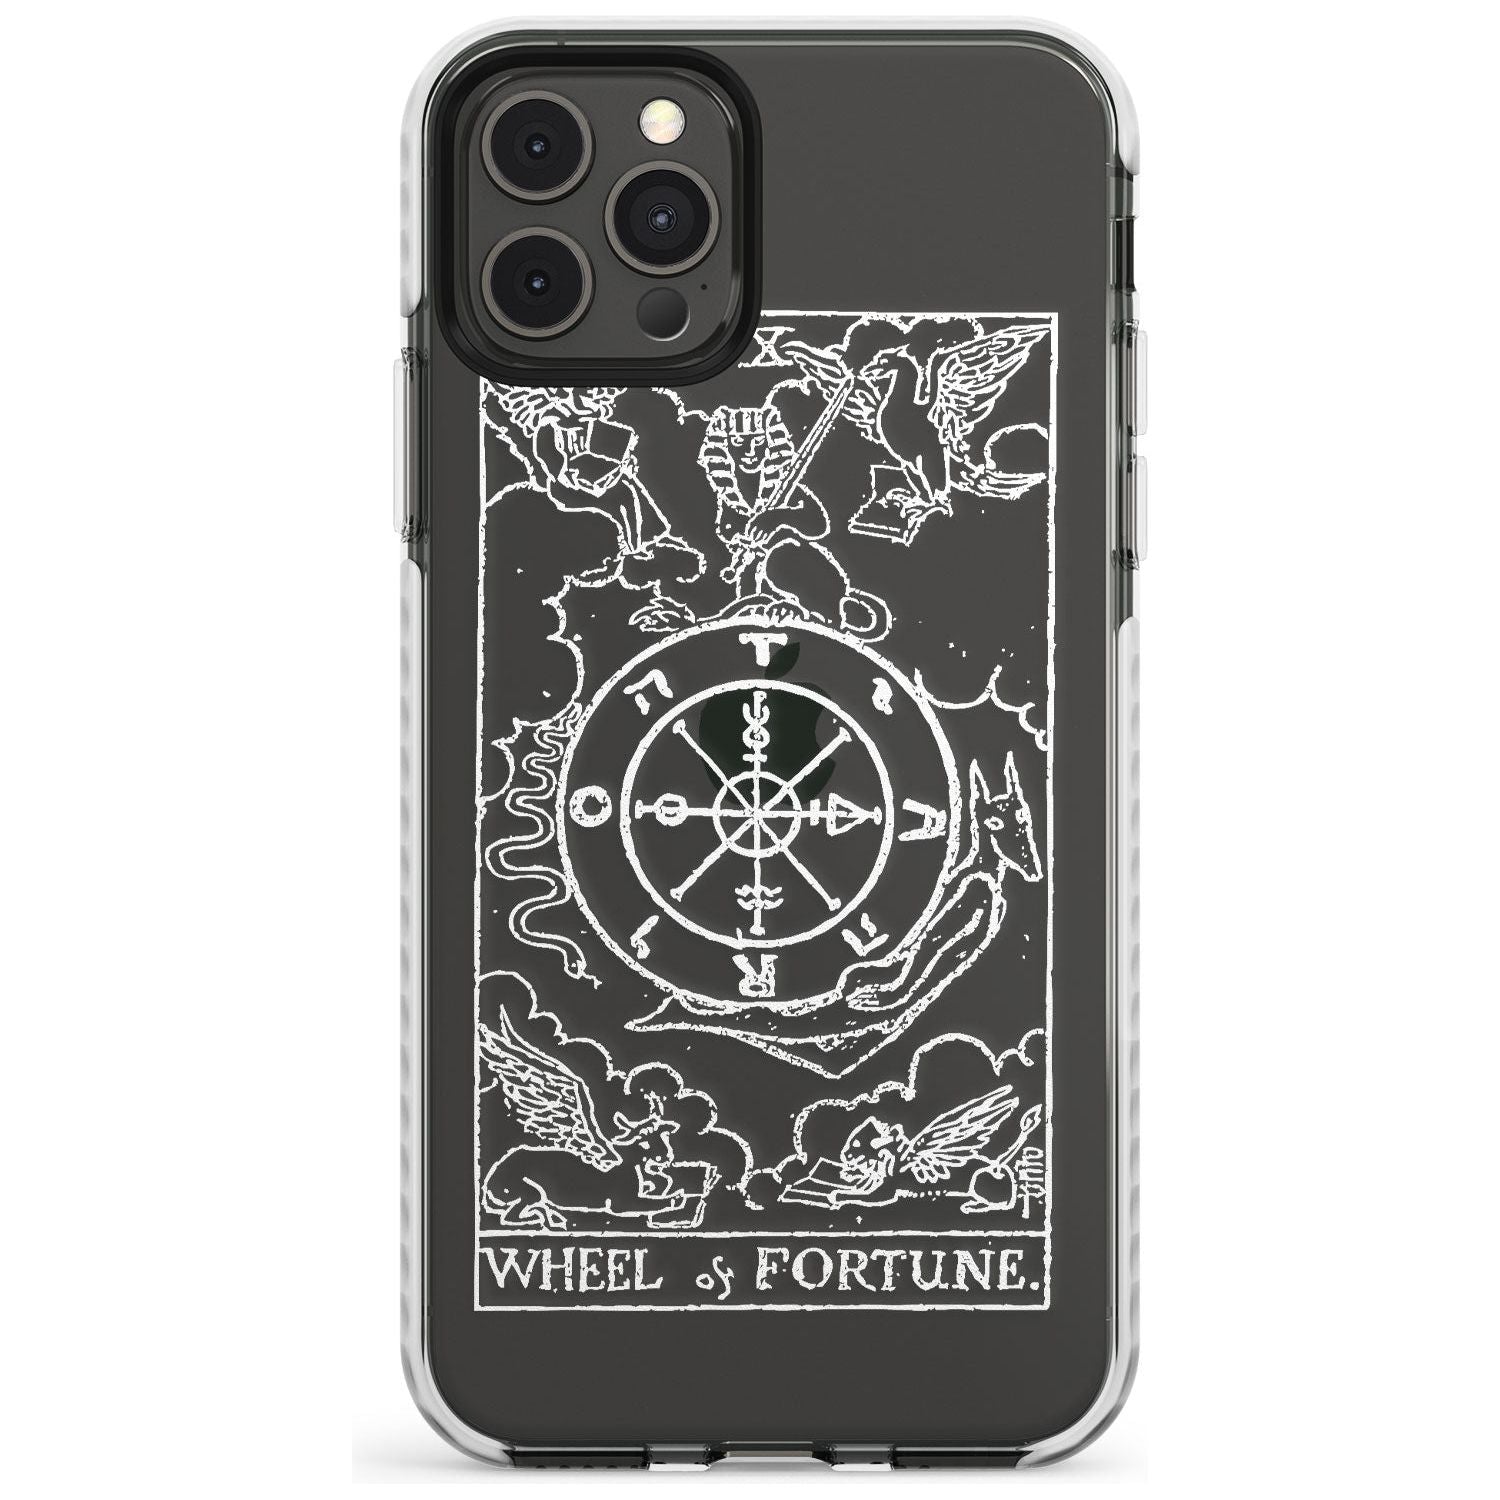 Wheel of Fortune Tarot Card - White Transparent Slim TPU Phone Case for iPhone 11 Pro Max